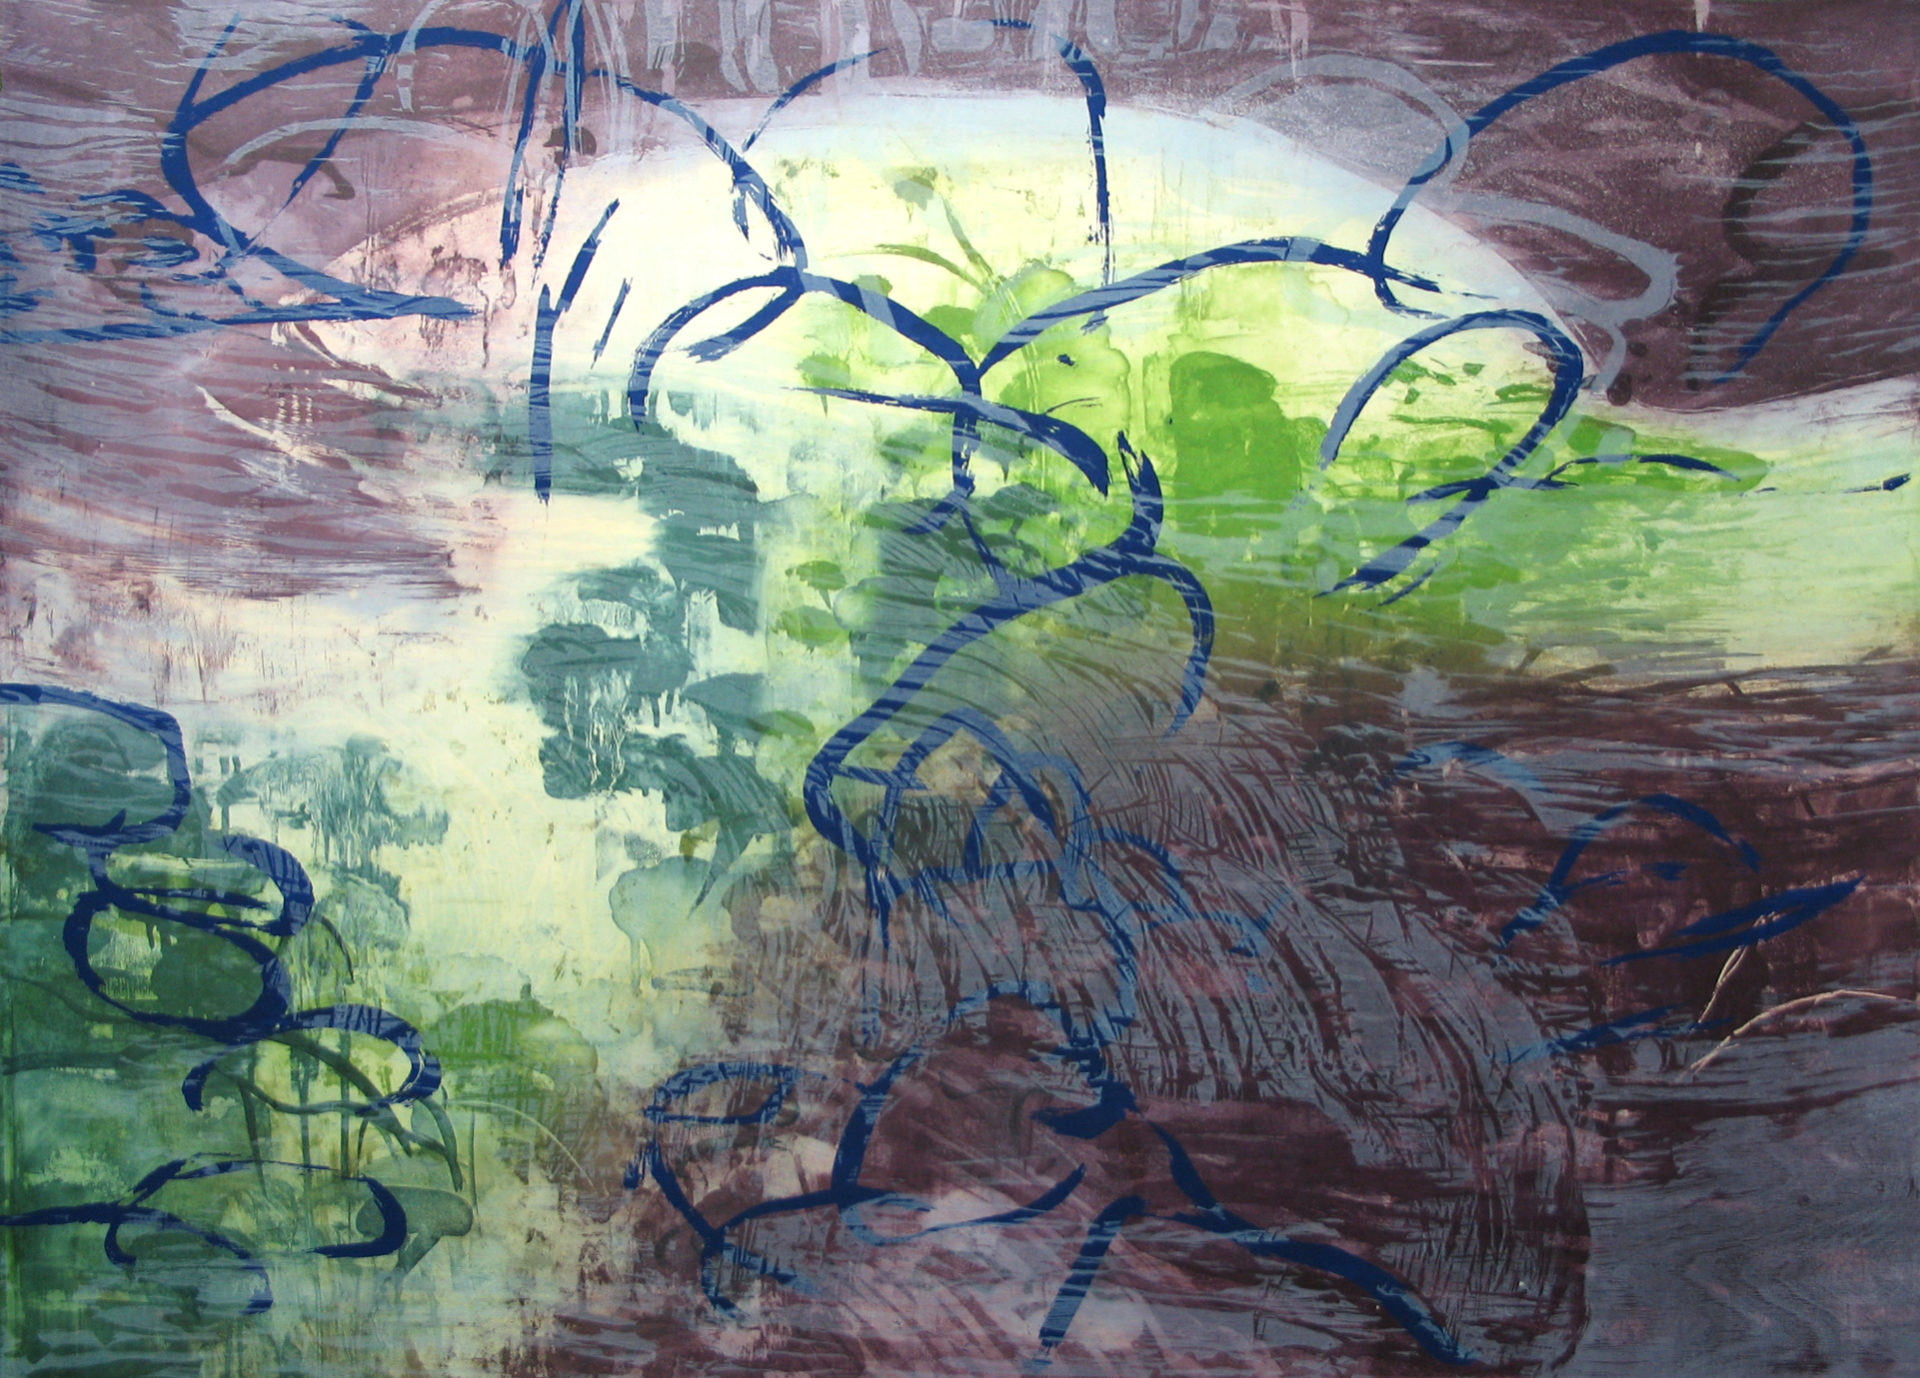 Pond Edge IV, 2005, Etching, aquatint, silkscreen and woodcut, 32 x 42 1/4 inches (81.3 x 107.3 cm), Edition of 50